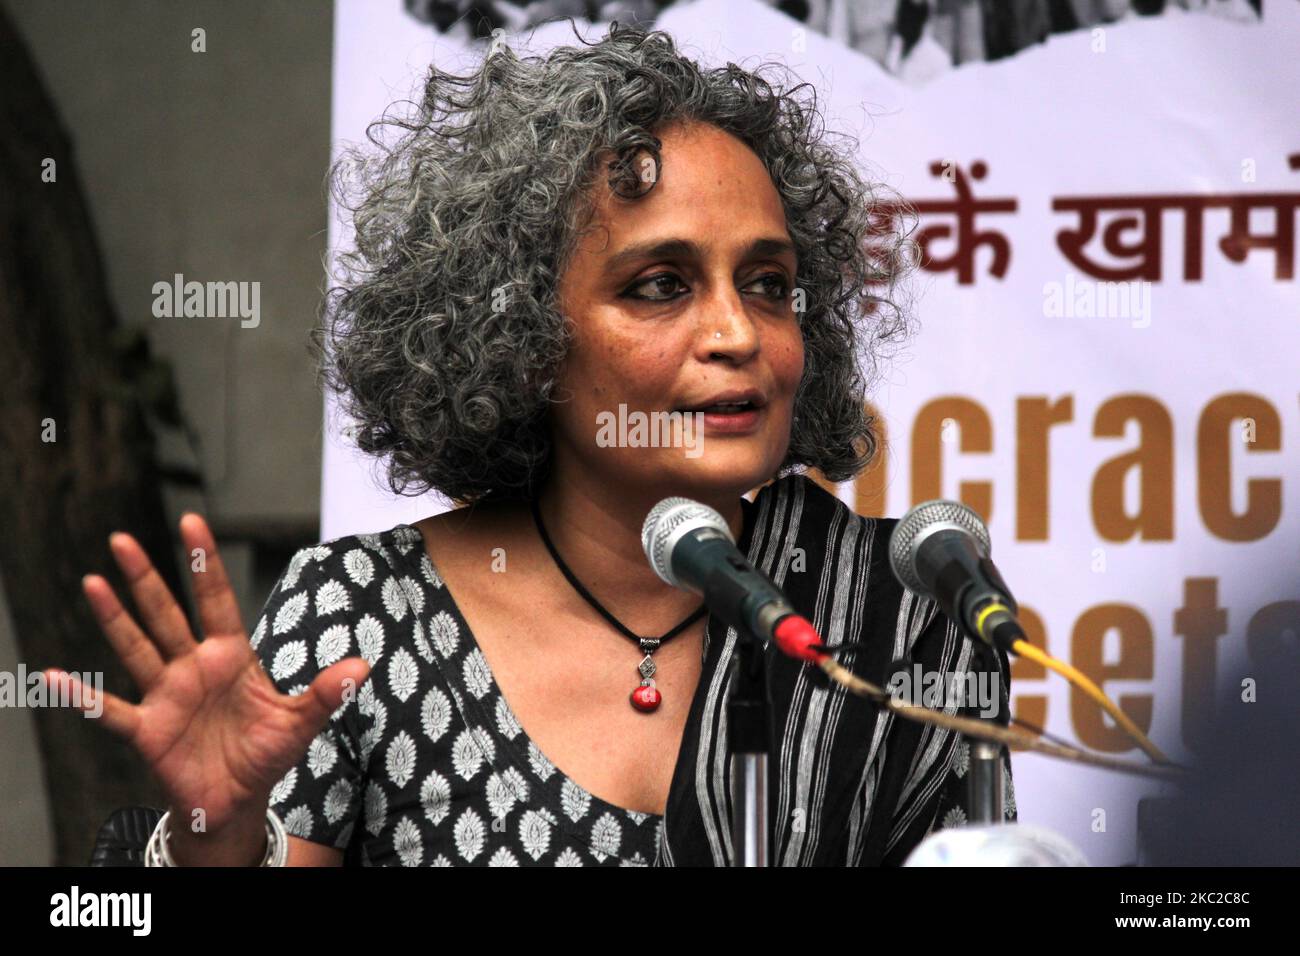 Internationally acclaimed author and activist Arundhati Roy speaks during a press conference on the Supreme Court's recent opinion on public protests, in which it said public places can't be occupied indefinitely in context of Shaheen Bagh, in New Delhi on October 22, 2020. The panel including eminent activists and people from civil society condemned the criminalization of right to peaceful public protest in a democracy. (Photo by Mayank Makhija/NurPhoto) Stock Photo